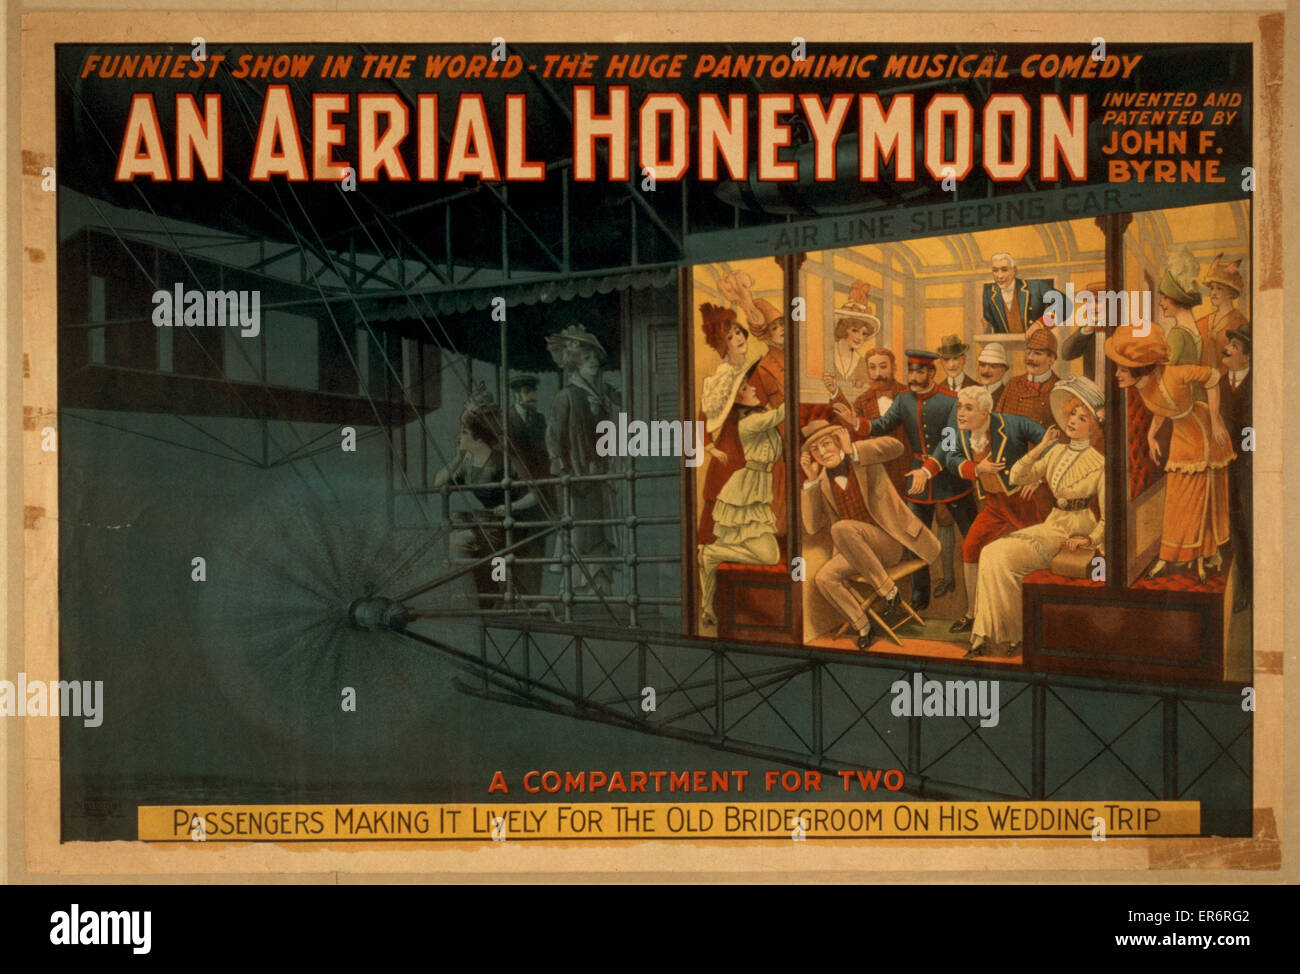 An Aerial honeymoon invented and patented by John F. Byrne : funniest show in the world - the huge pantomimic musical comedy. Date 19 - ?. Stock Photo